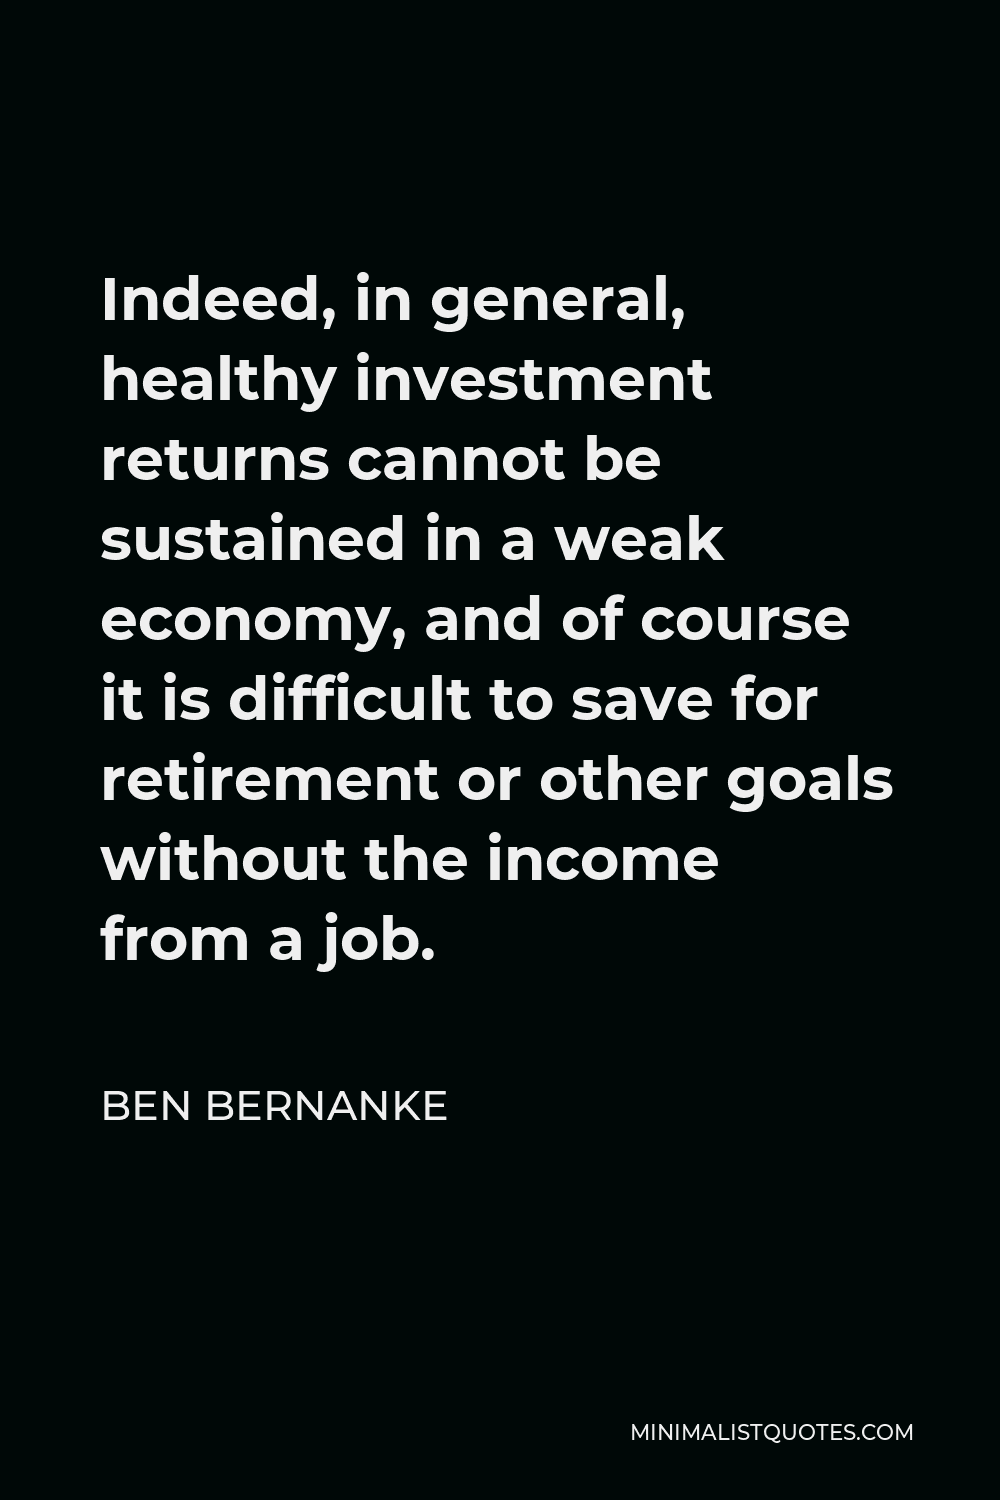 Ben Bernanke Quote - Indeed, in general, healthy investment returns cannot be sustained in a weak economy, and of course it is difficult to save for retirement or other goals without the income from a job.